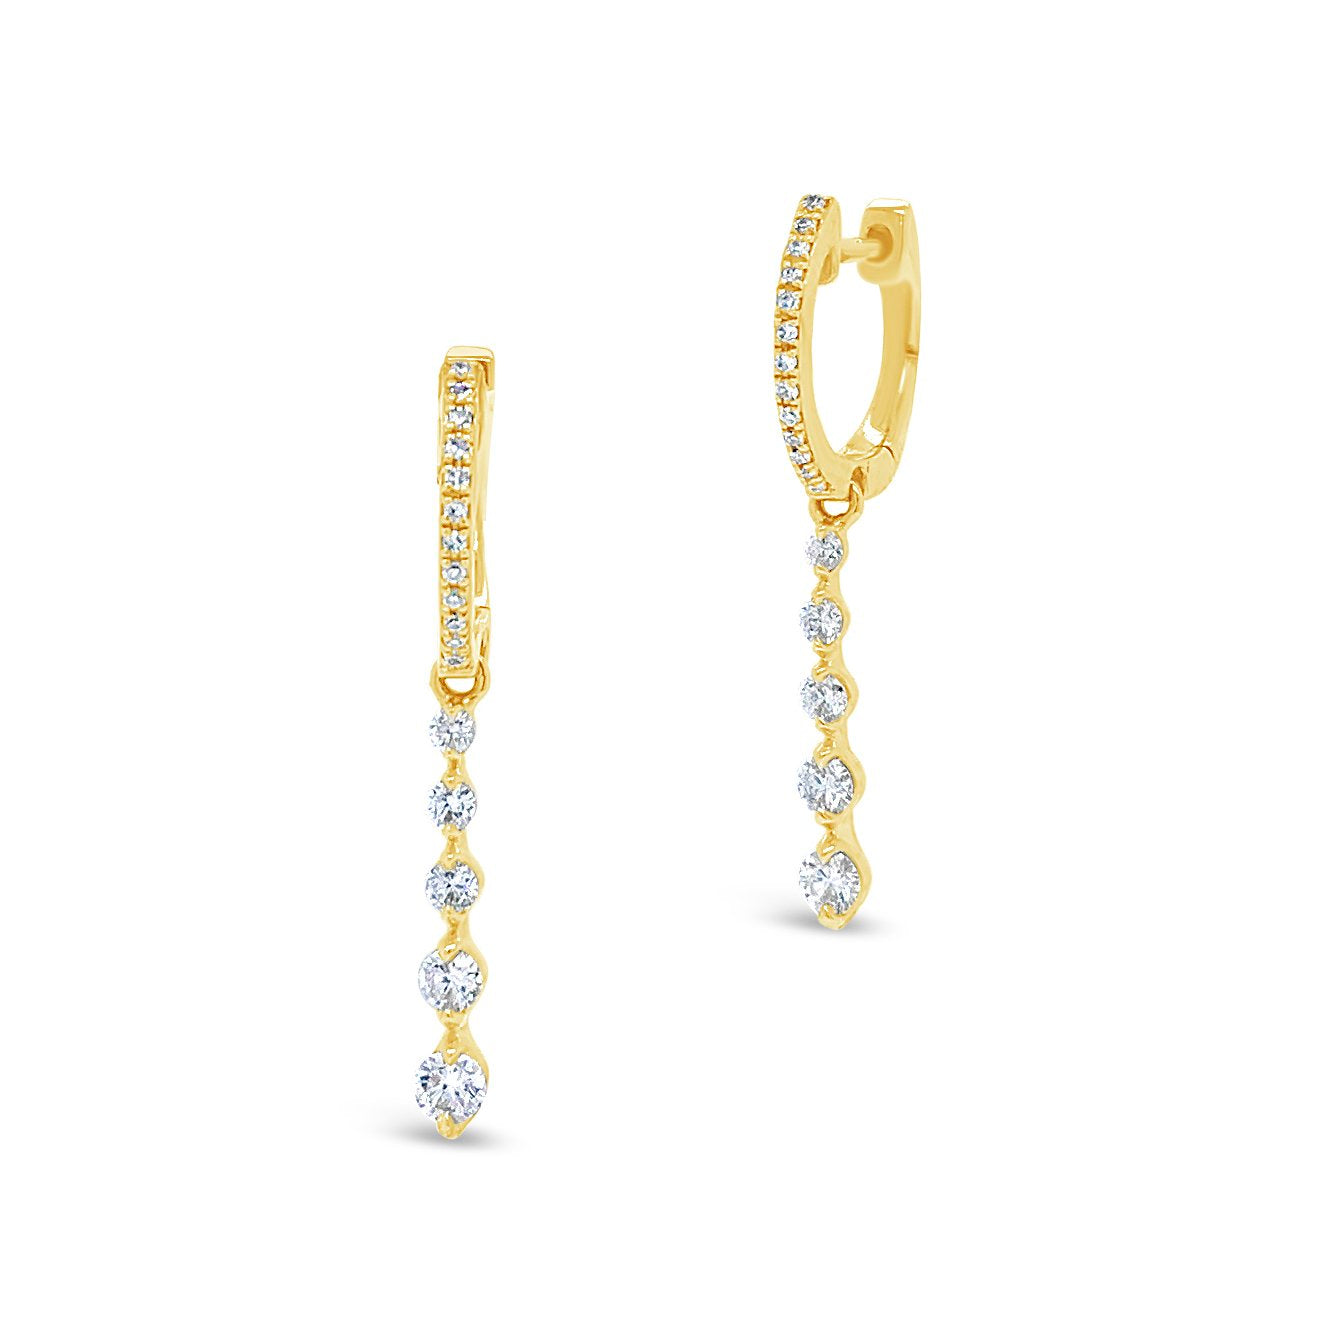 Gold huggie earring with prong-set diamond drop earrings -14k gold weighing 2.03 grams  -36 round diamonds weighing .46 carats